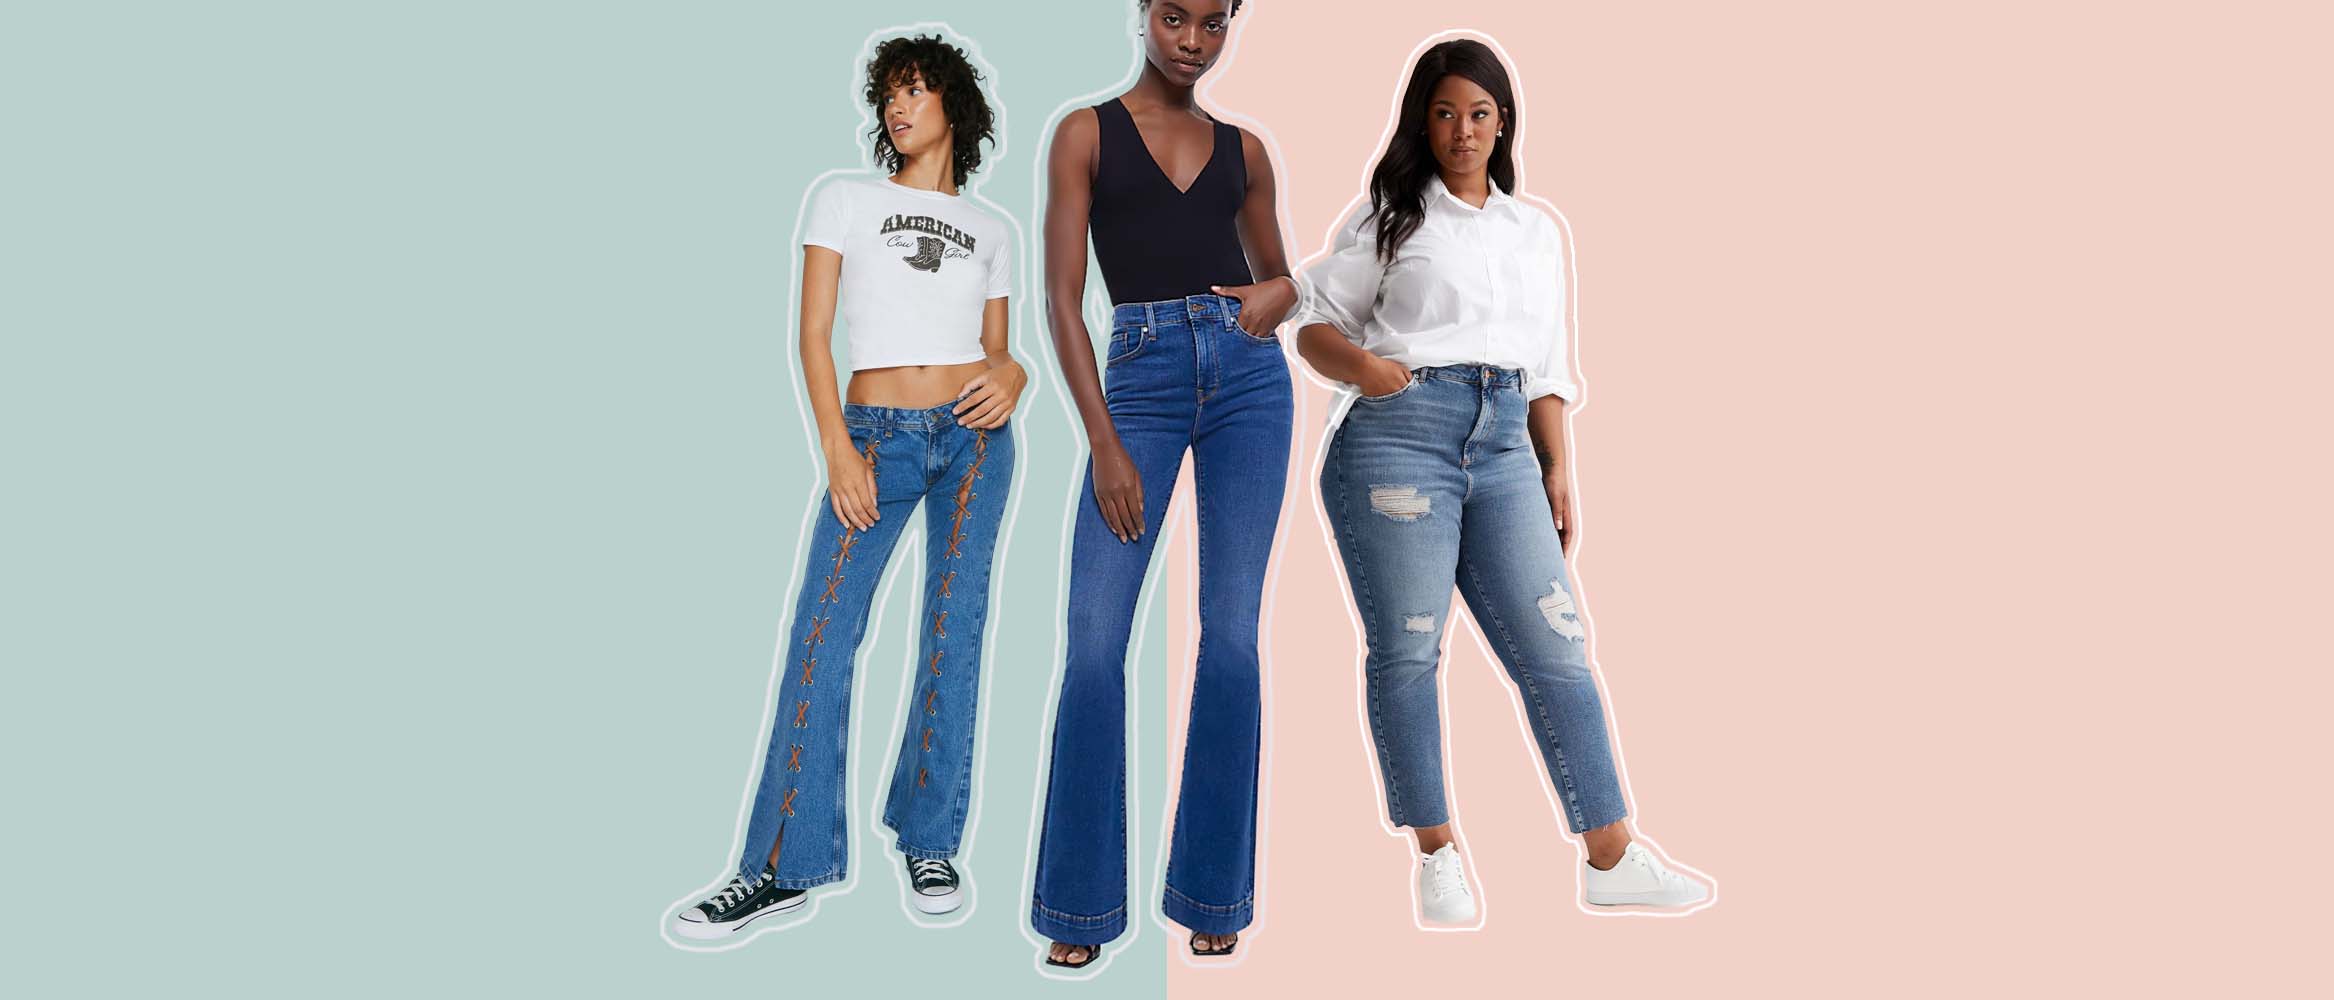 High Waisted Jeans Outfits That Flatter Every Body Type